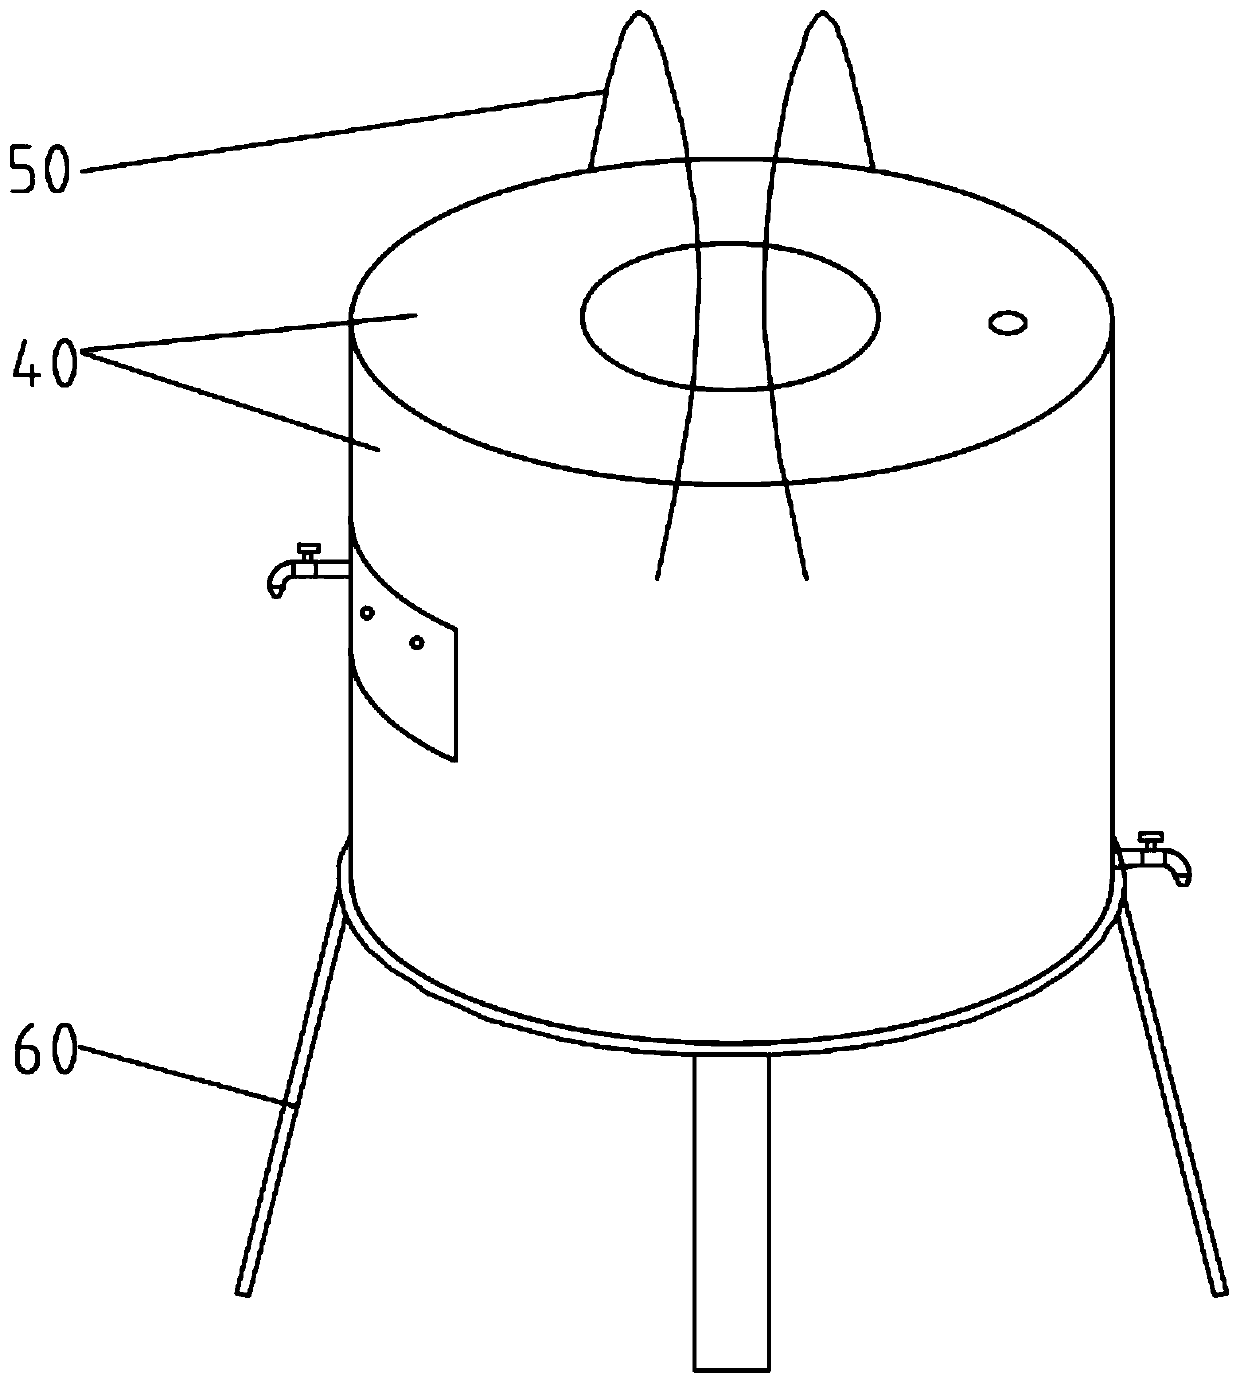 Water boiling device and method in plateau region